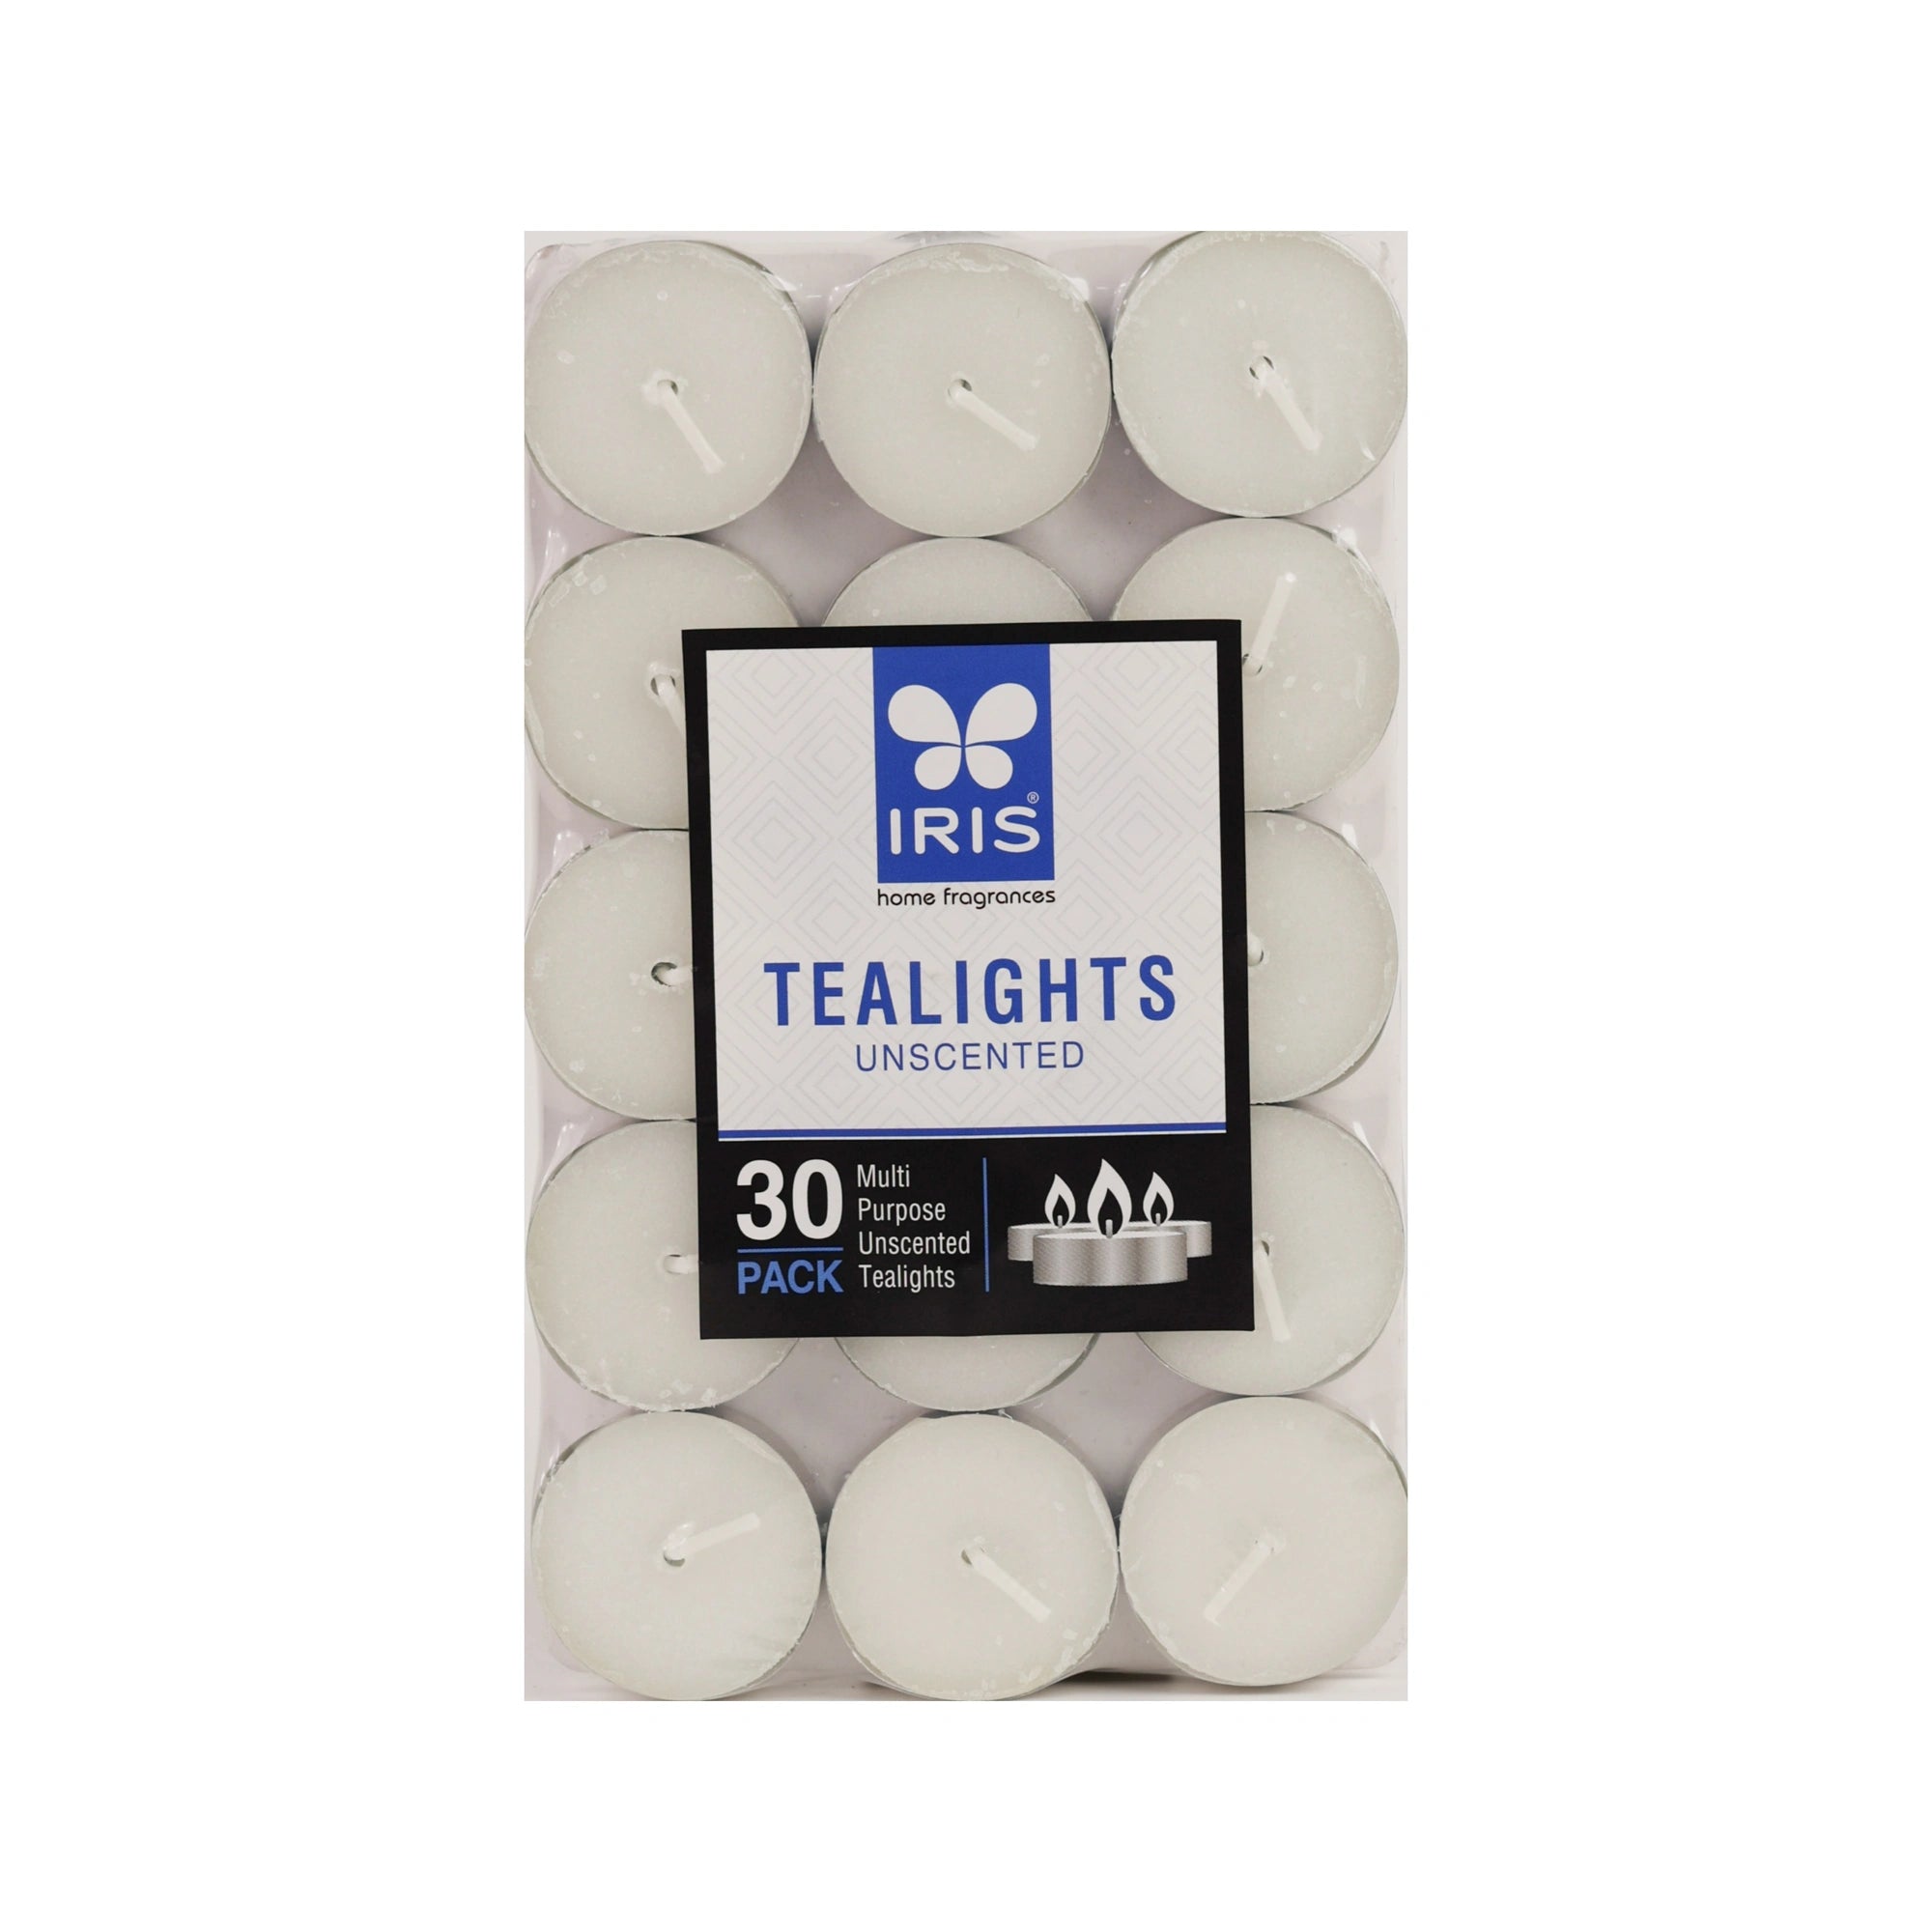 IRIS Unscented Tealights - Pack of 30